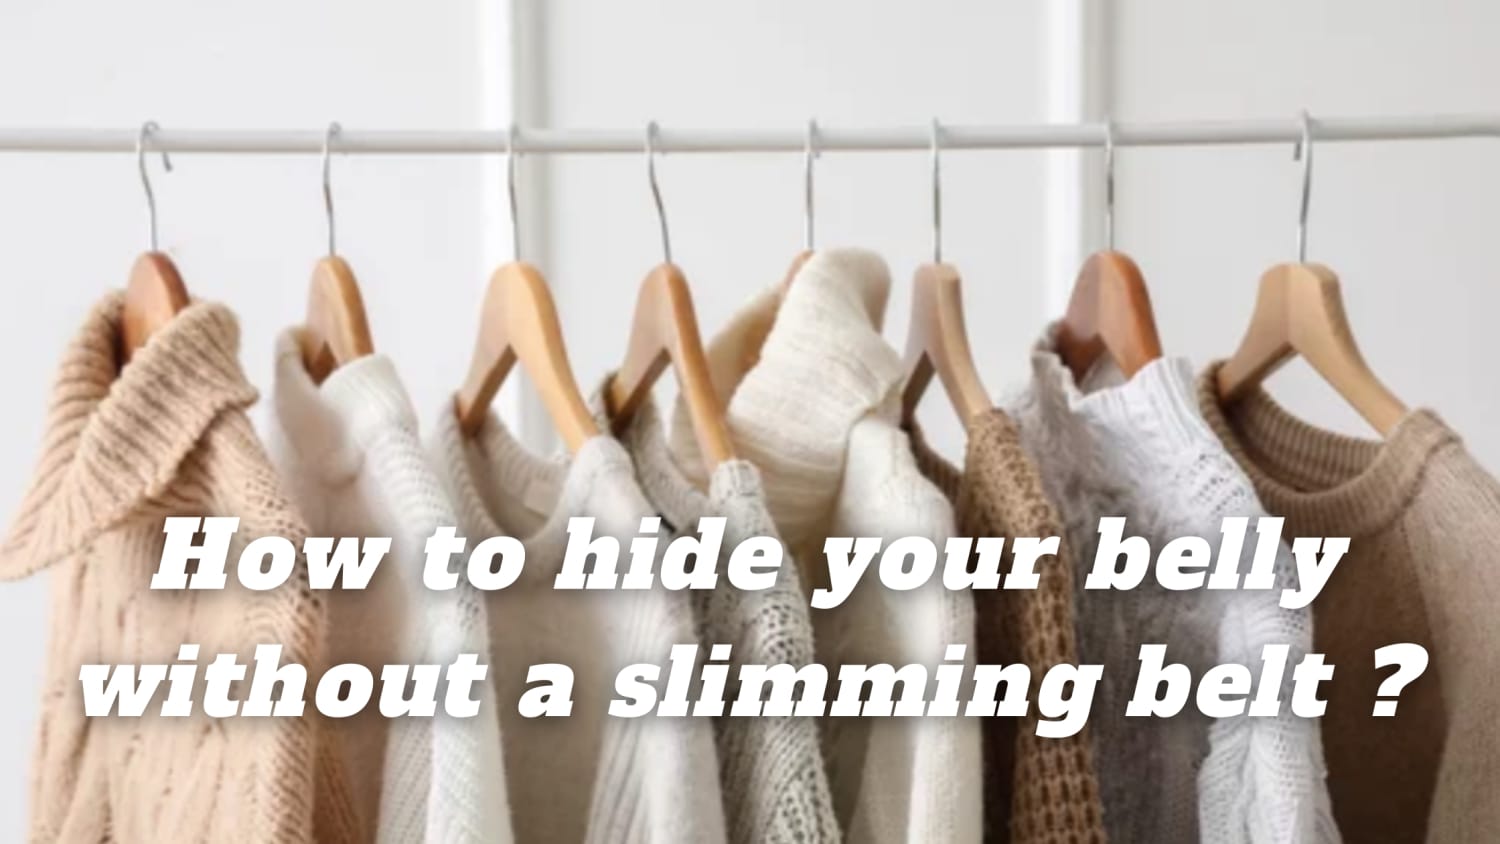 How to hide your belly without a slimming belt ?